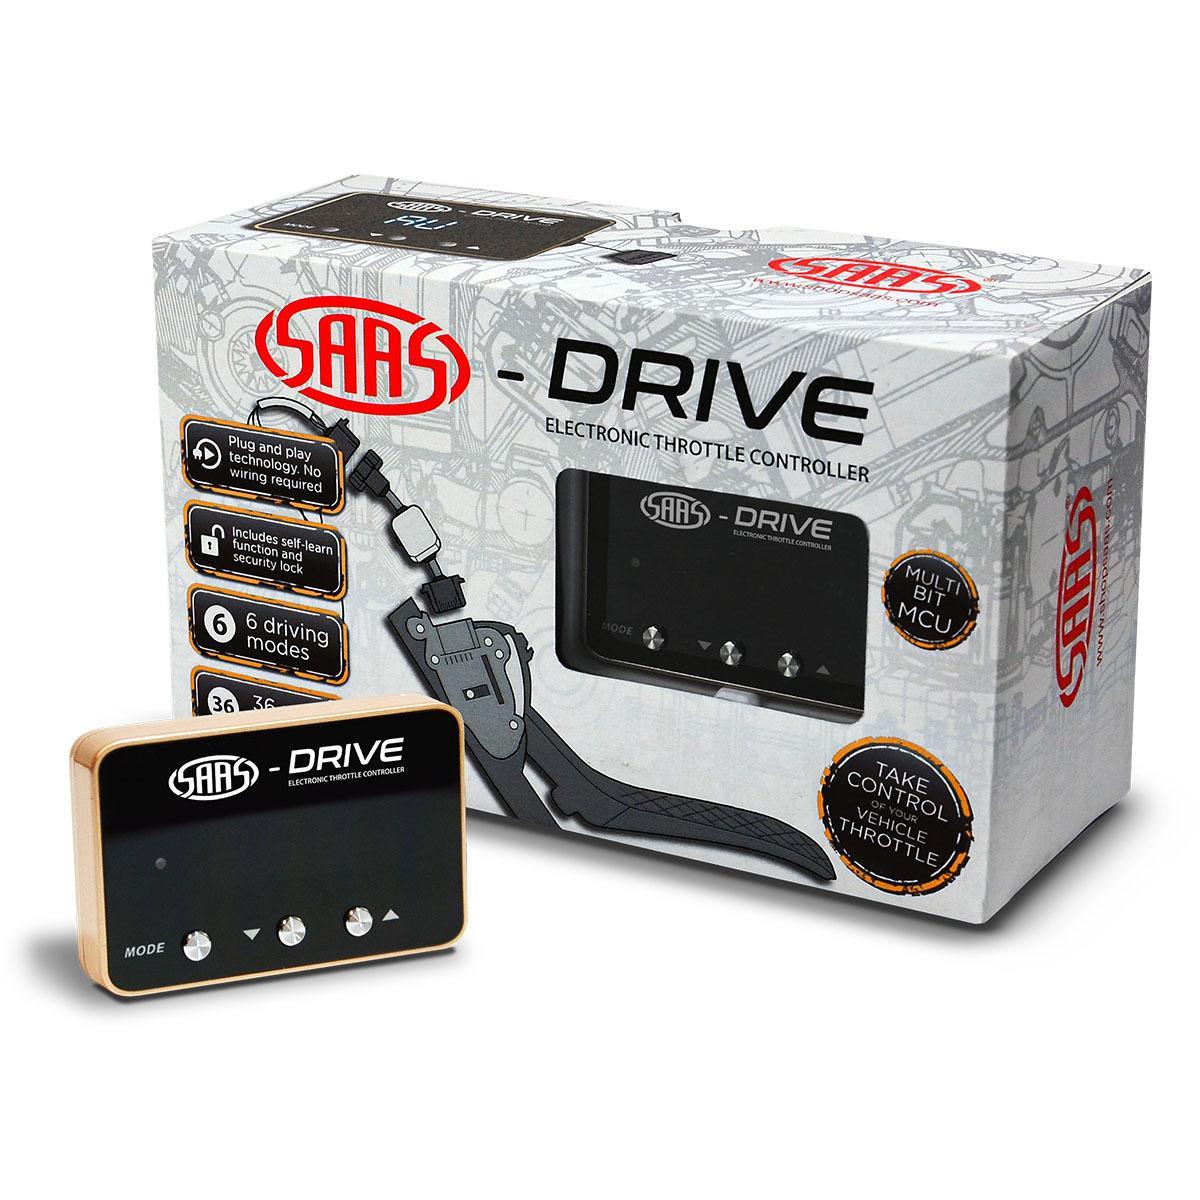 SAAS-Drive Throttle Controller For Audi SQ5 2013 >